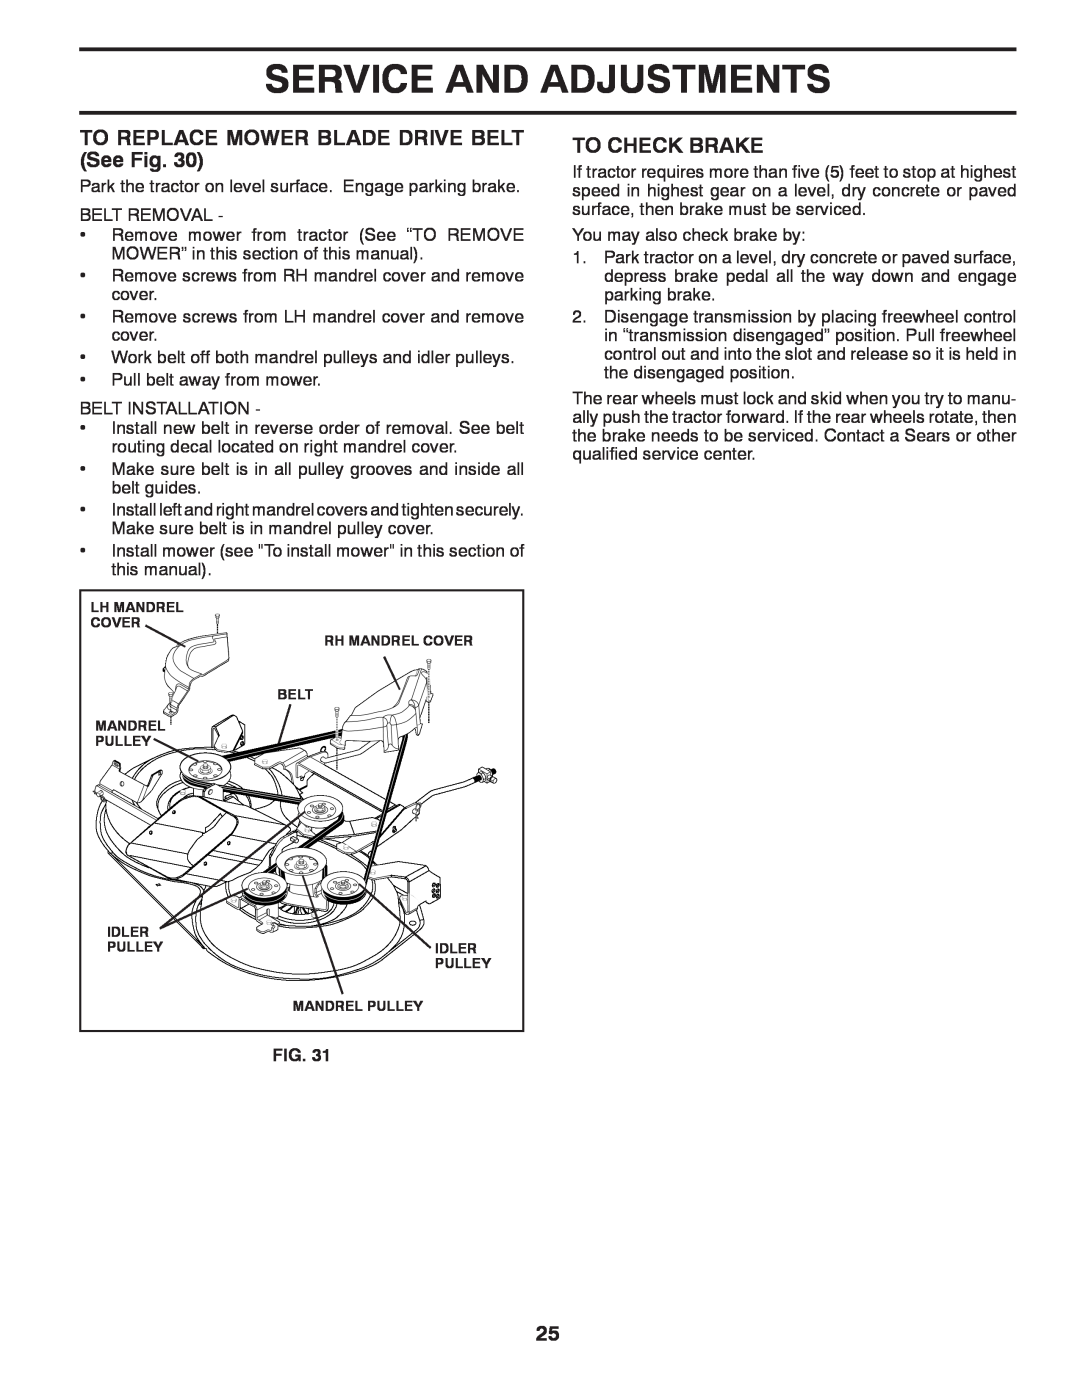 Husqvarna CTH2036 owner manual TO REPLACE MOWER BLADE DRIVE BELT See Fig, To Check Brake, Service And Adjustments 